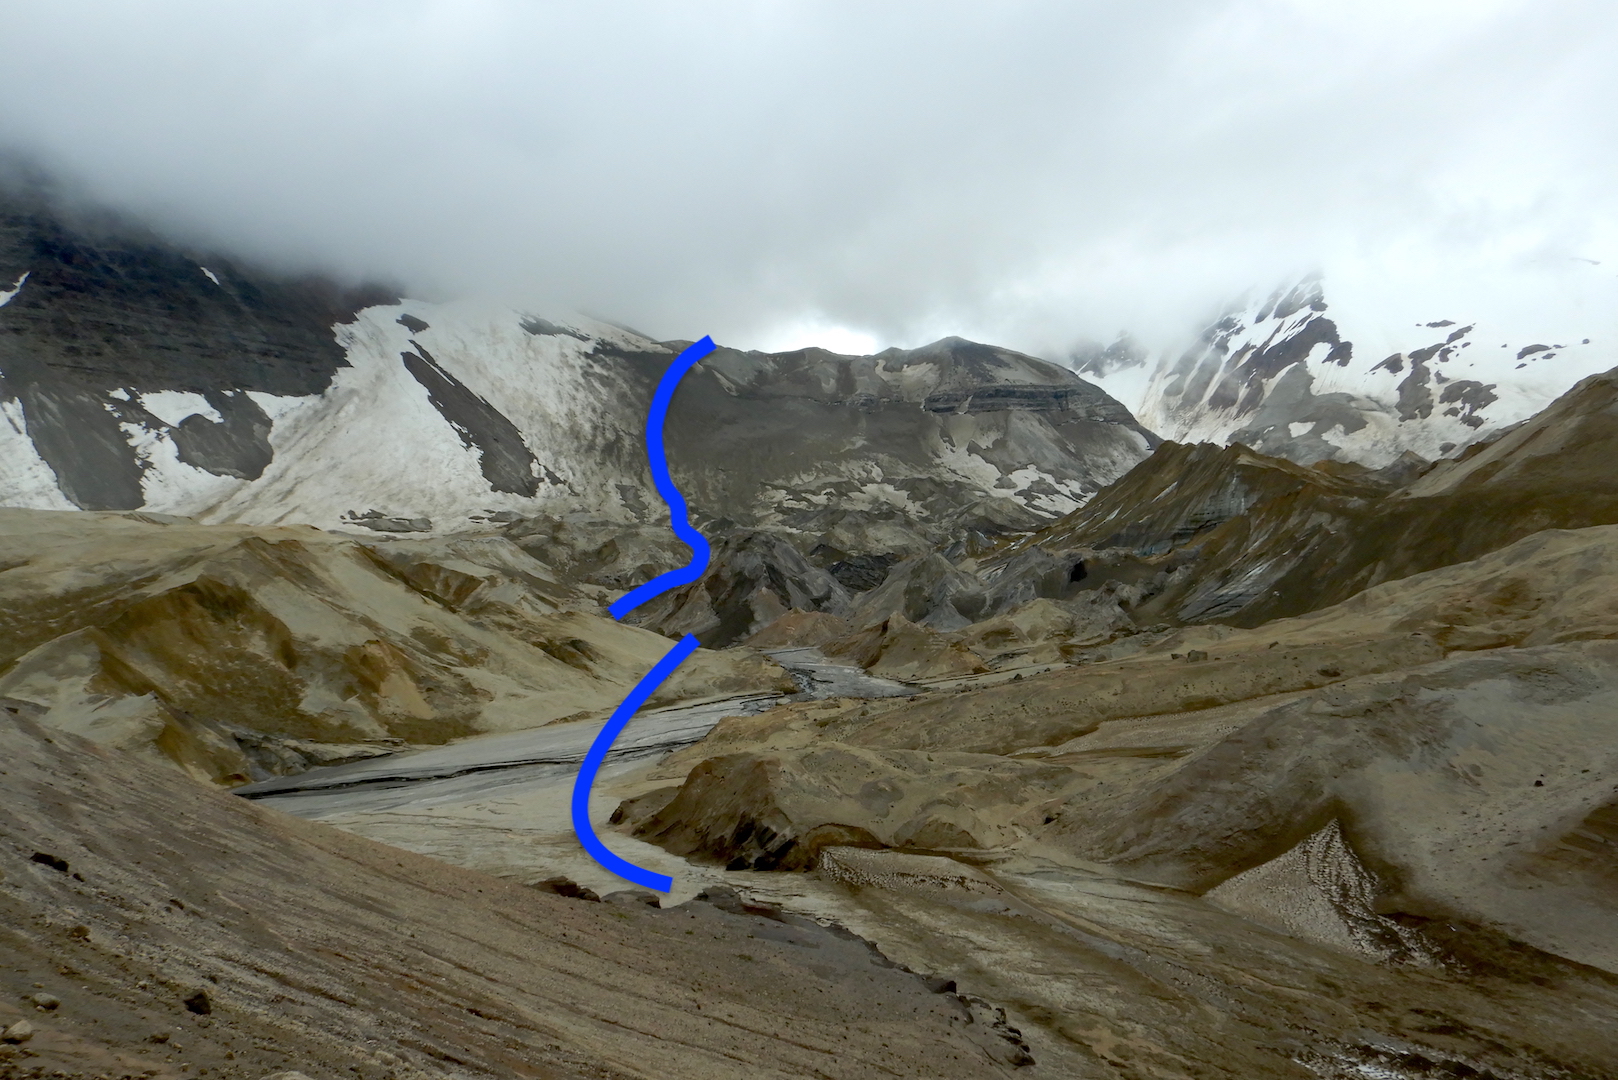 View of hummocky landscape created by ash and pumice covered glaciers at the foot of mountains hidden in clouds. Blue line near center represents route.